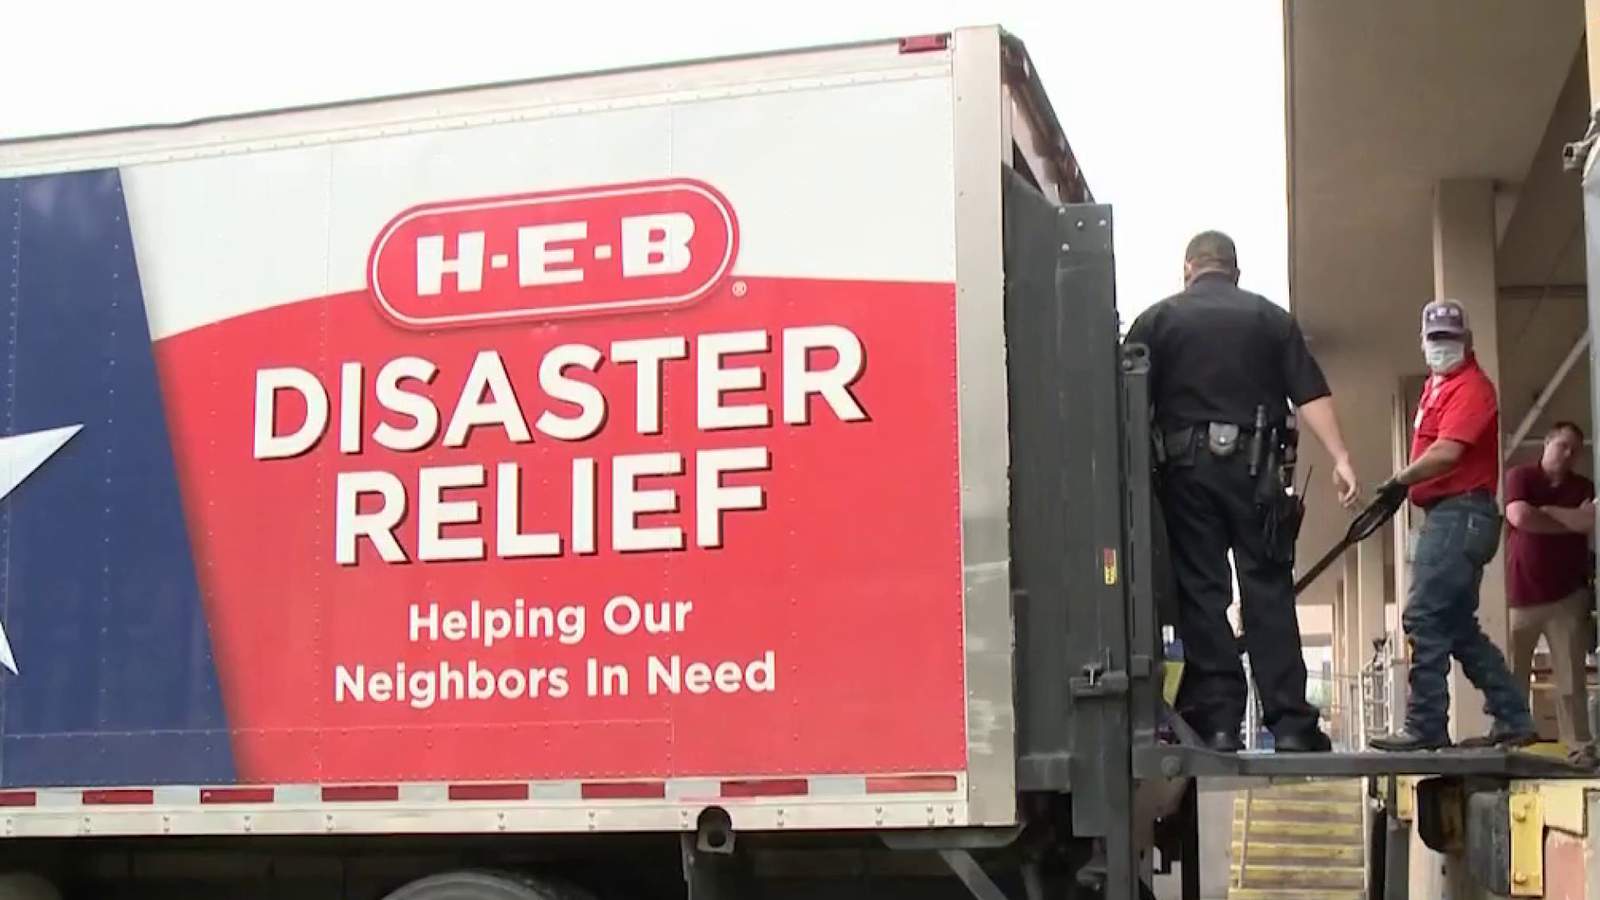 Video shows H-E-B semitrailer tip over in gusting winds from Hurricane Hanna